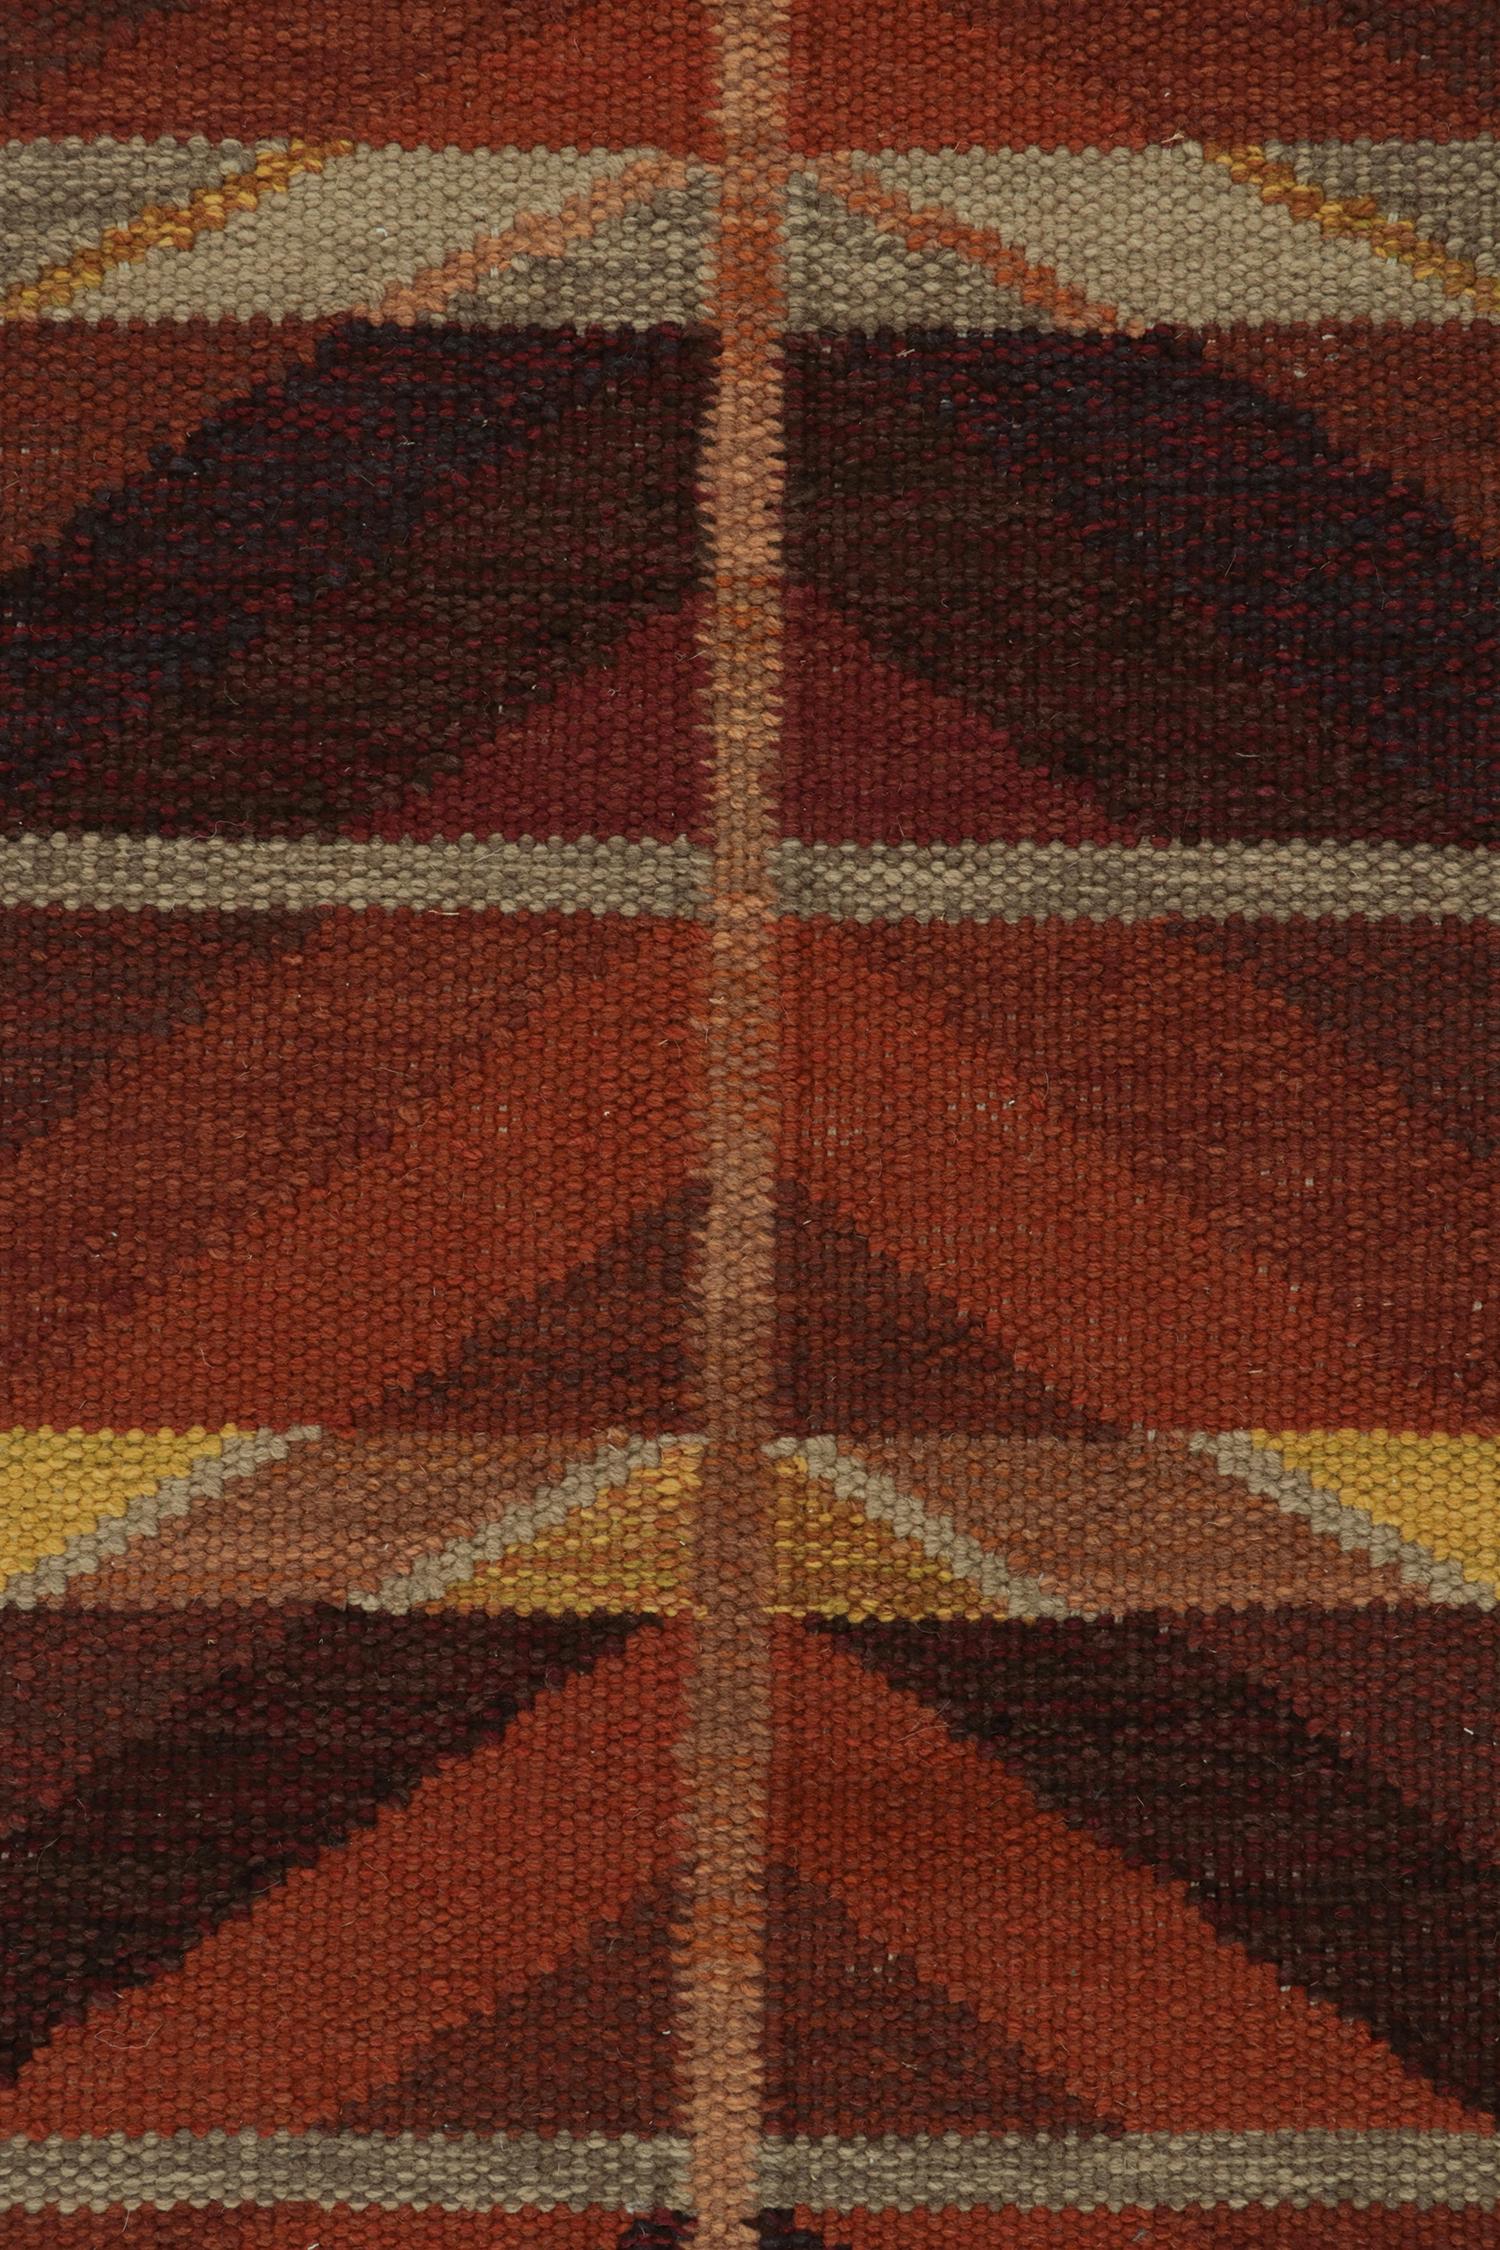 Rug & Kilim’s Scandinavian Style Kilim in Red, Ochre and Gray Geometric Pattern In New Condition For Sale In Long Island City, NY